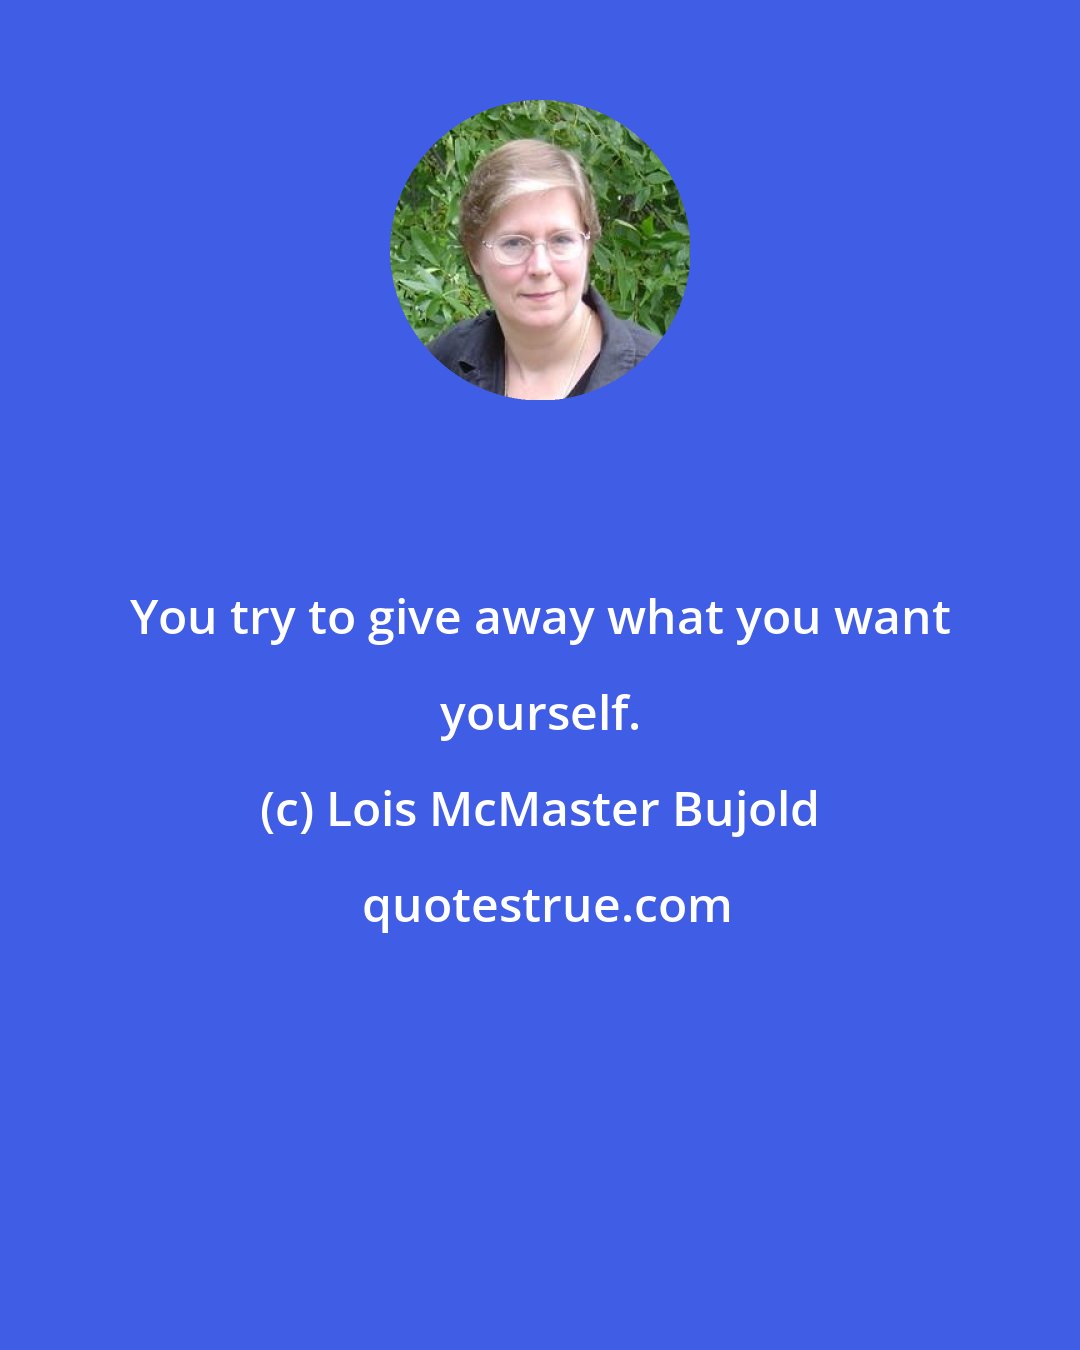 Lois McMaster Bujold: You try to give away what you want yourself.